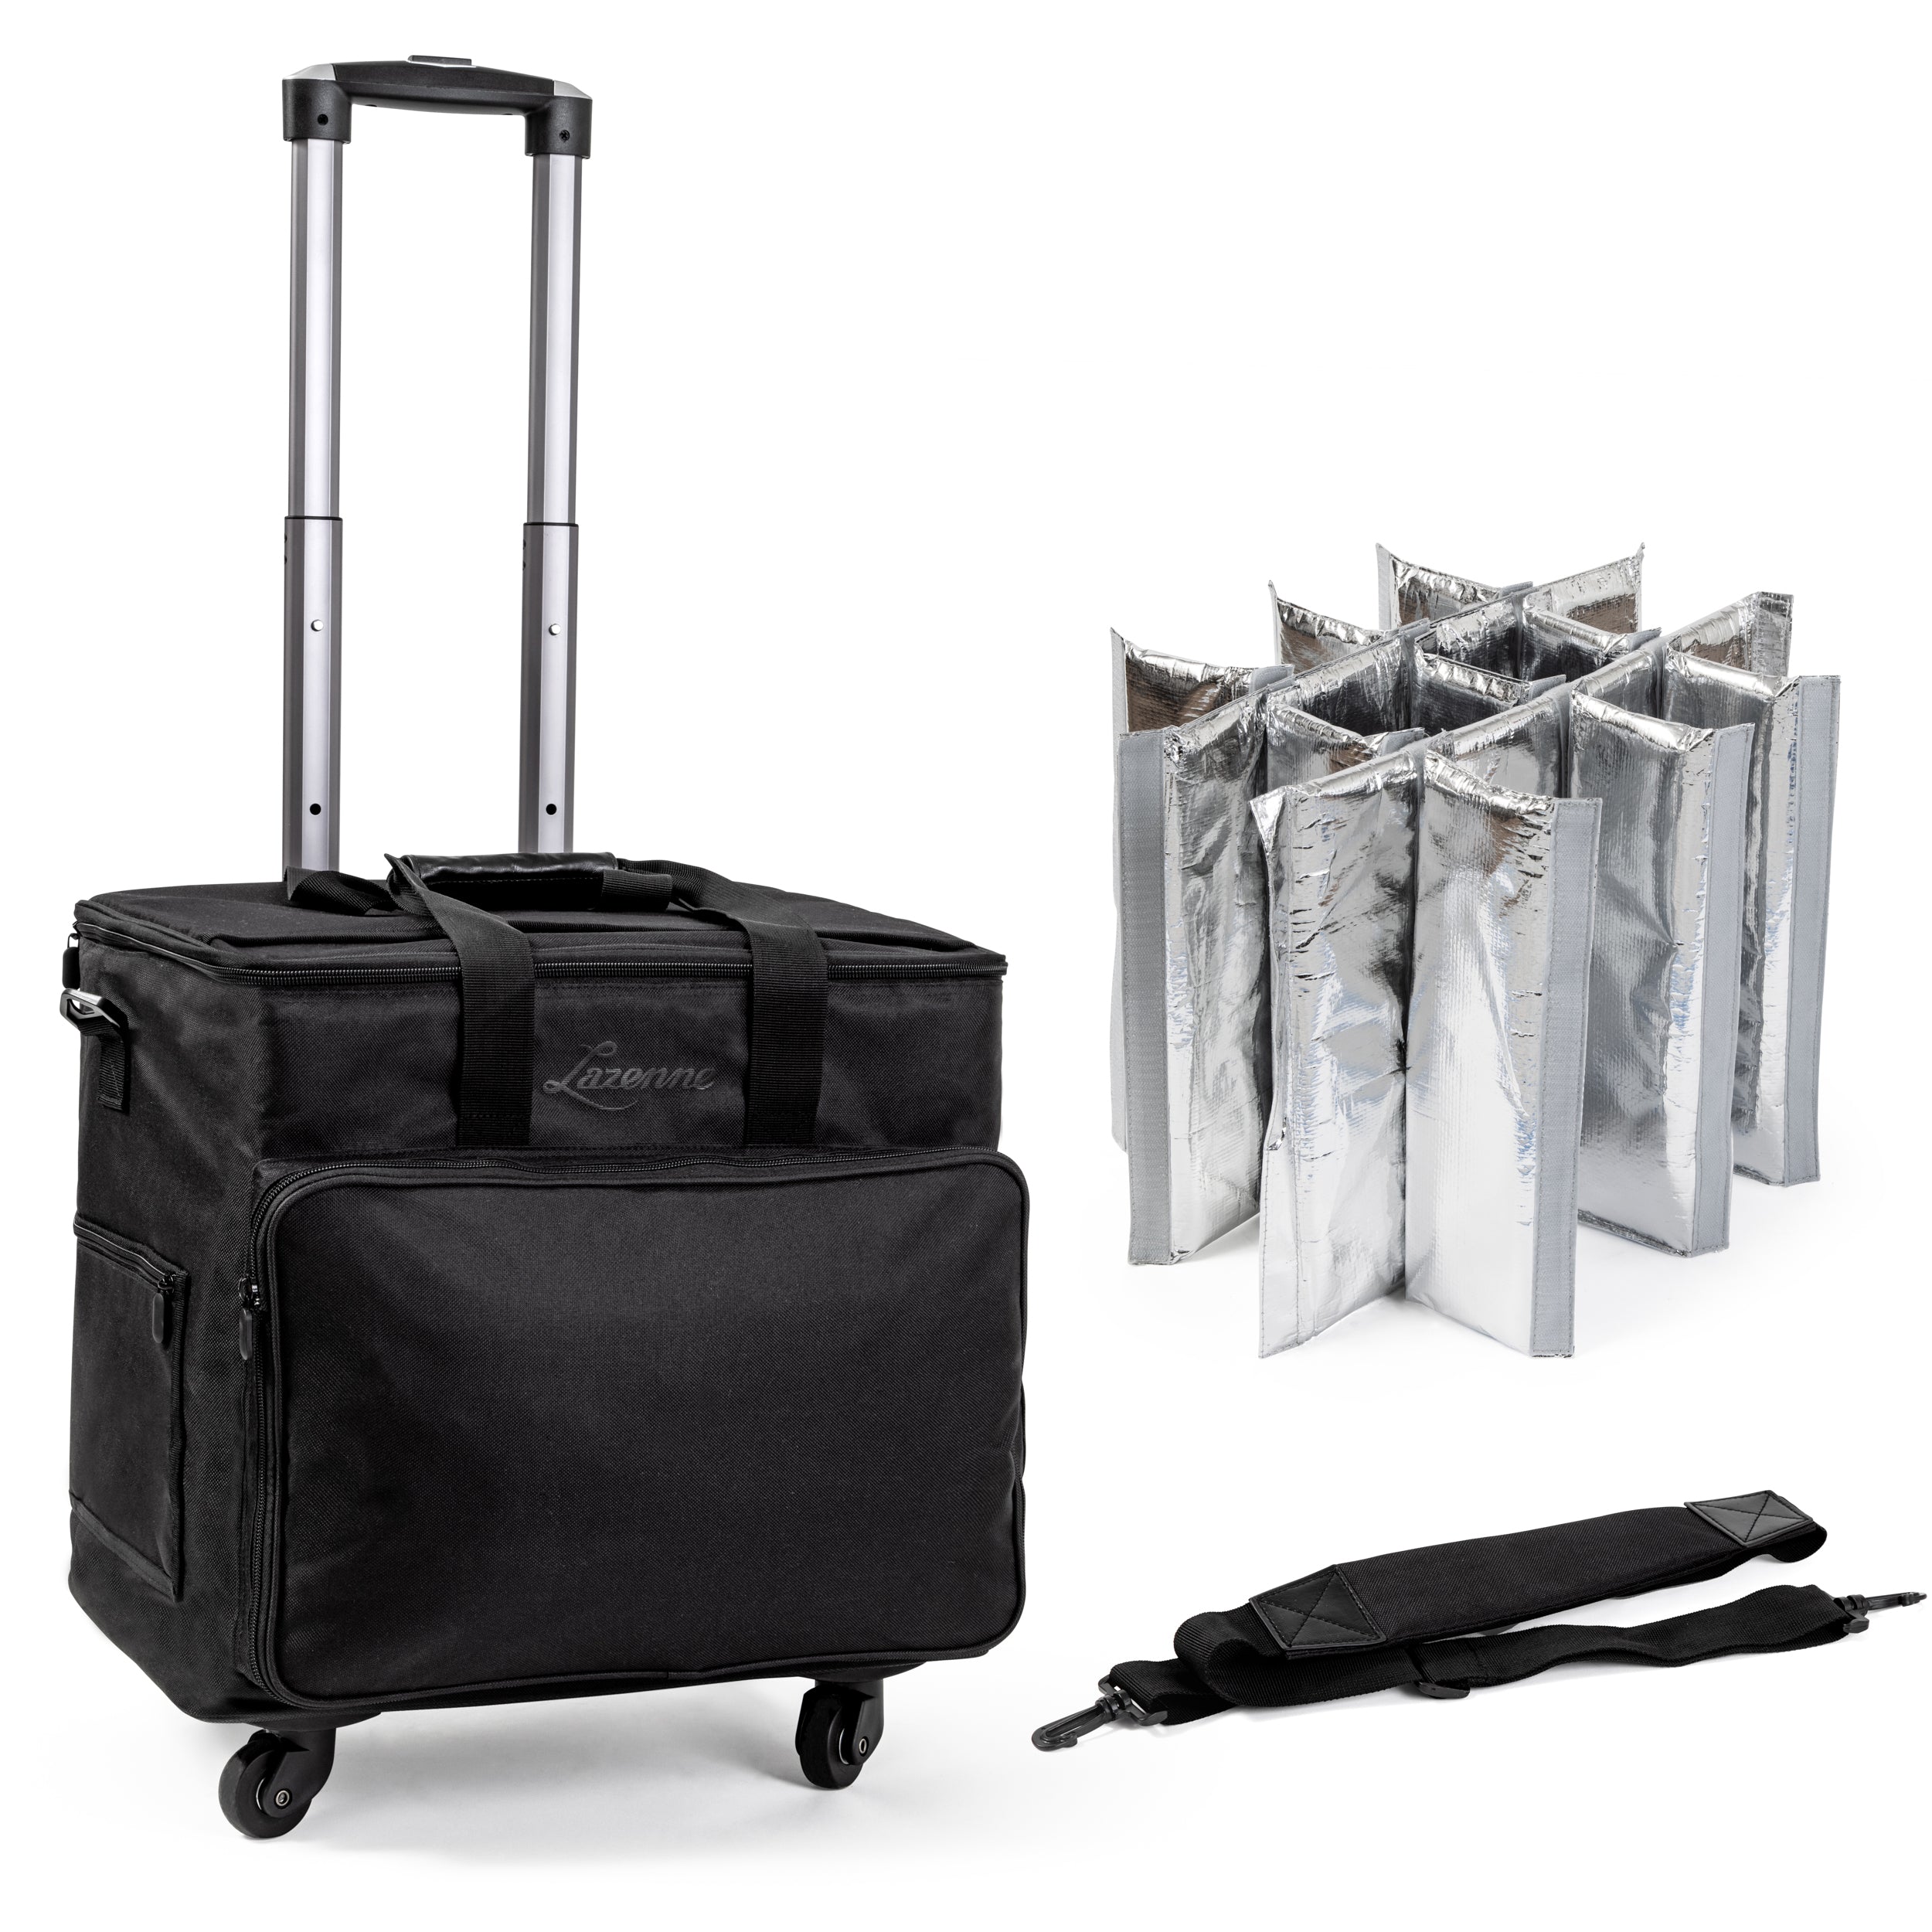 WINE LEATHER CABIN LUGGAGE TROLLEY BAG WITH 4 WHEEL (360 ROTATION)